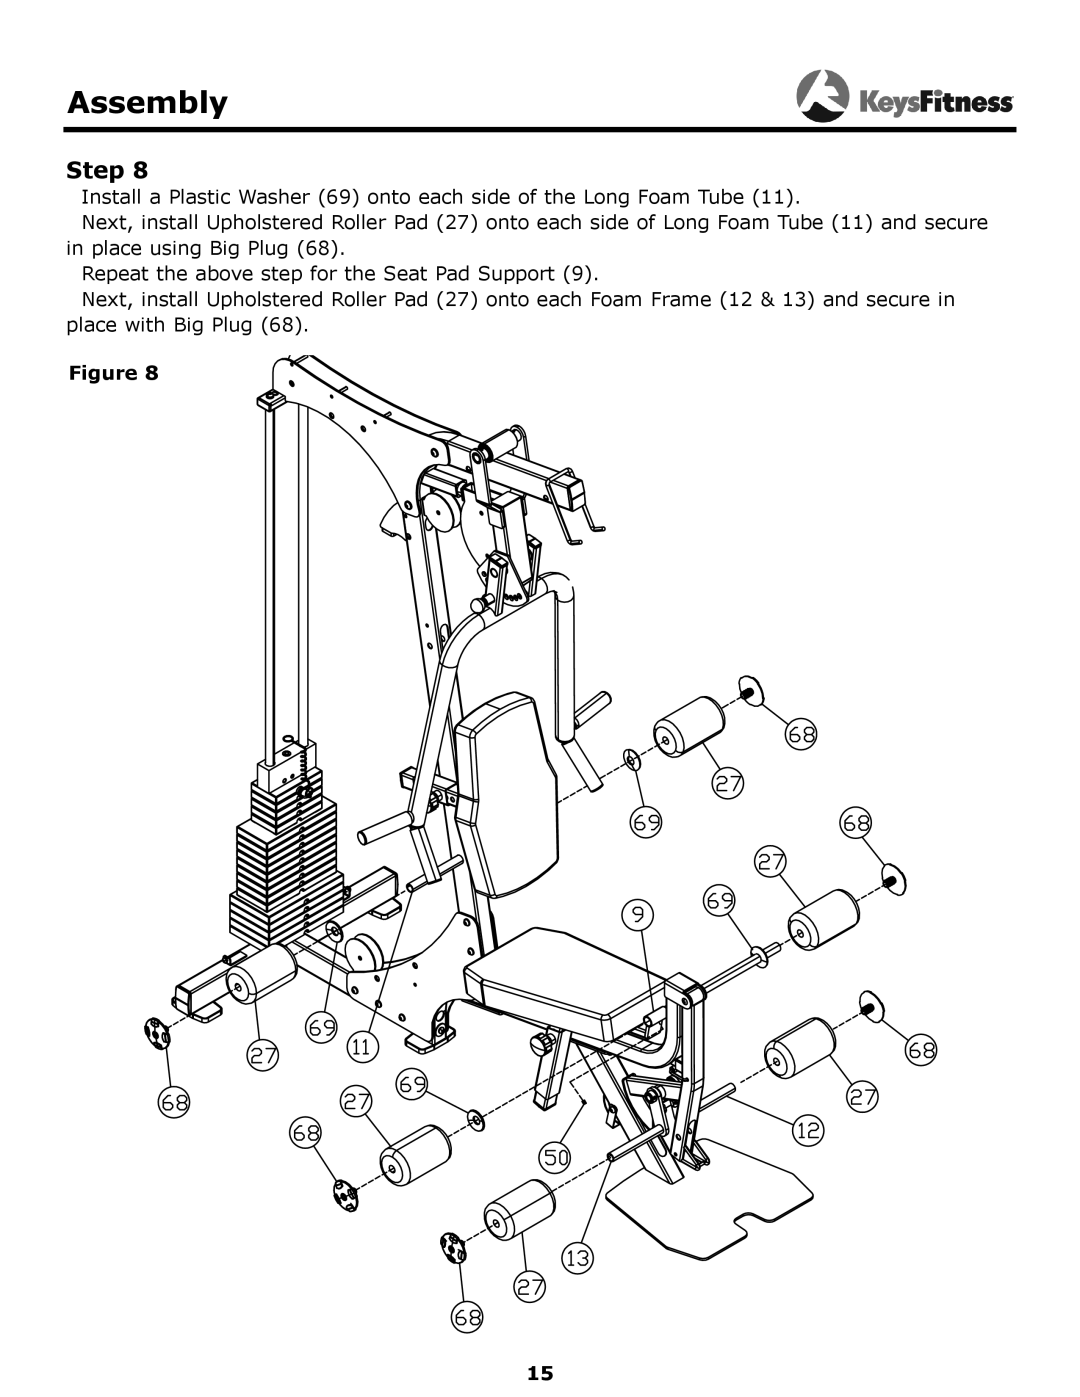 Keys Fitness KF-1560 owner manual Assembly, Install a Plastic Washer 69 onto each side of the Long Foam Tube 